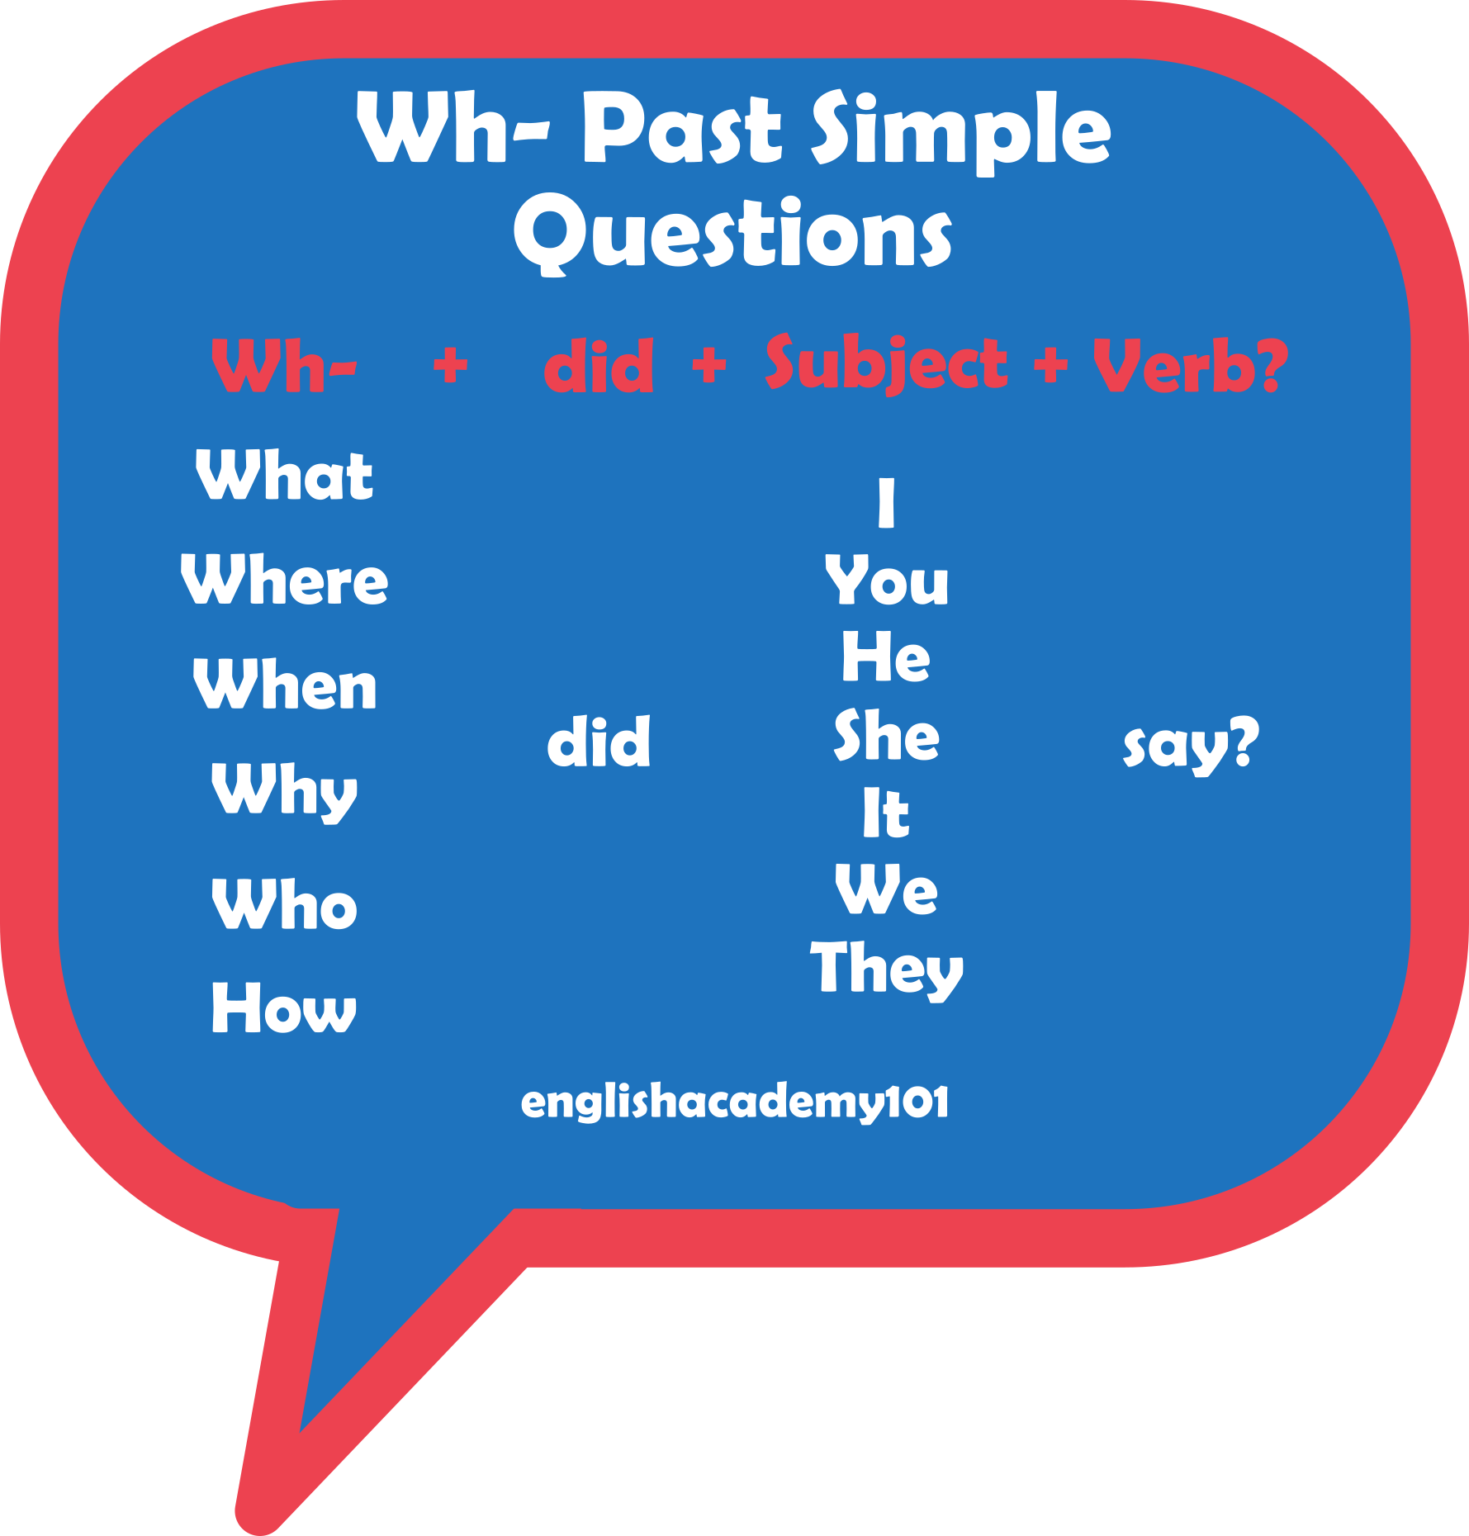 wh-questions-in-the-past-simple-tense-englishacademy101